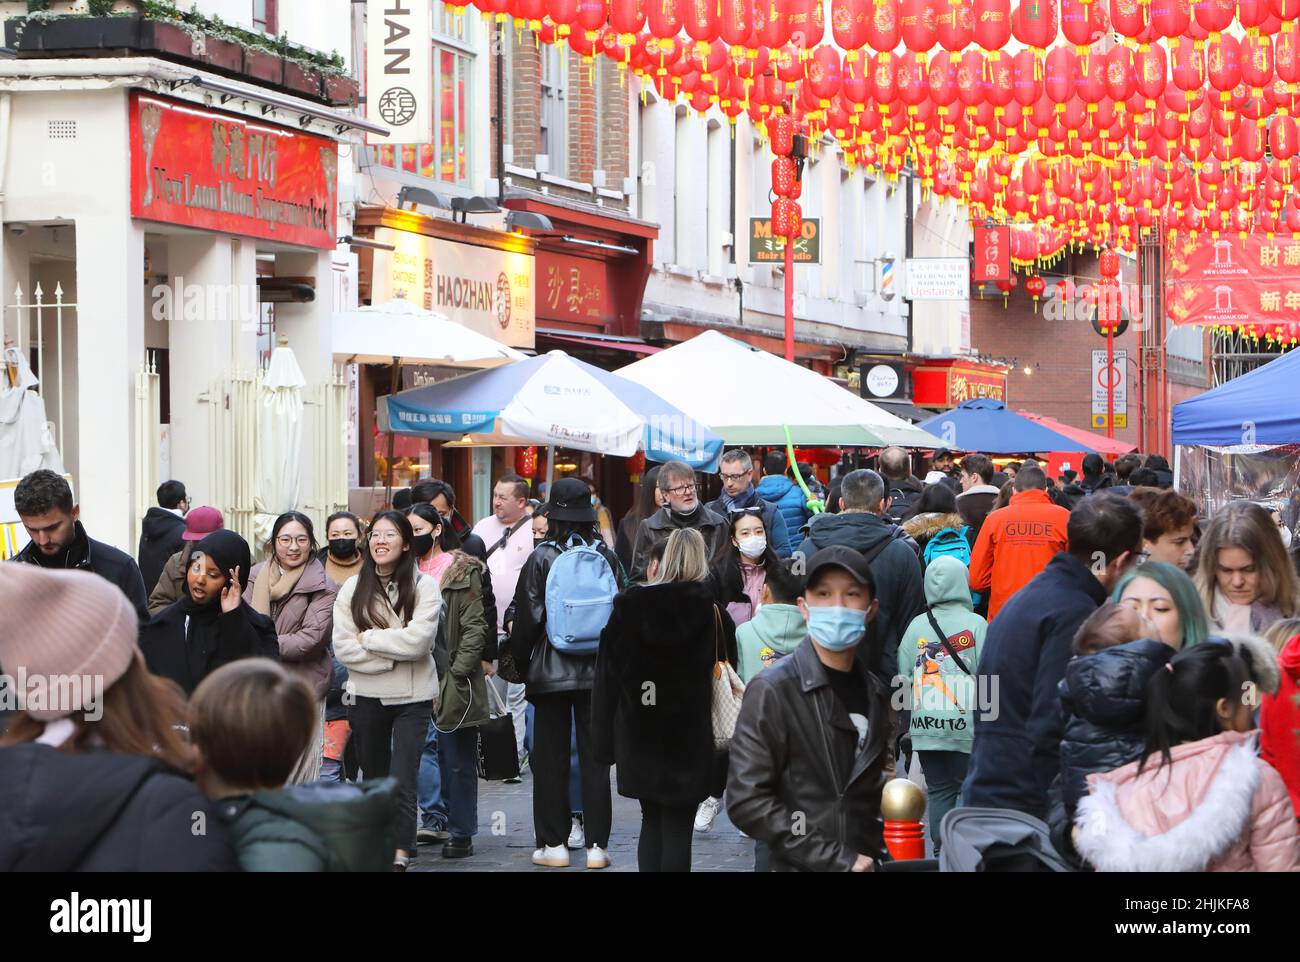 London, UK, January 30th 2022. Despite the usual parade being cancelled again due to Covid worries, people flocked to China  Town in Soho for eating, shopping and relaxing in the winter sunshine on the Sunday before Chinese New Year, which will be on February 1st. Credit: MonicaWells/Alamy Live News Stock Photo